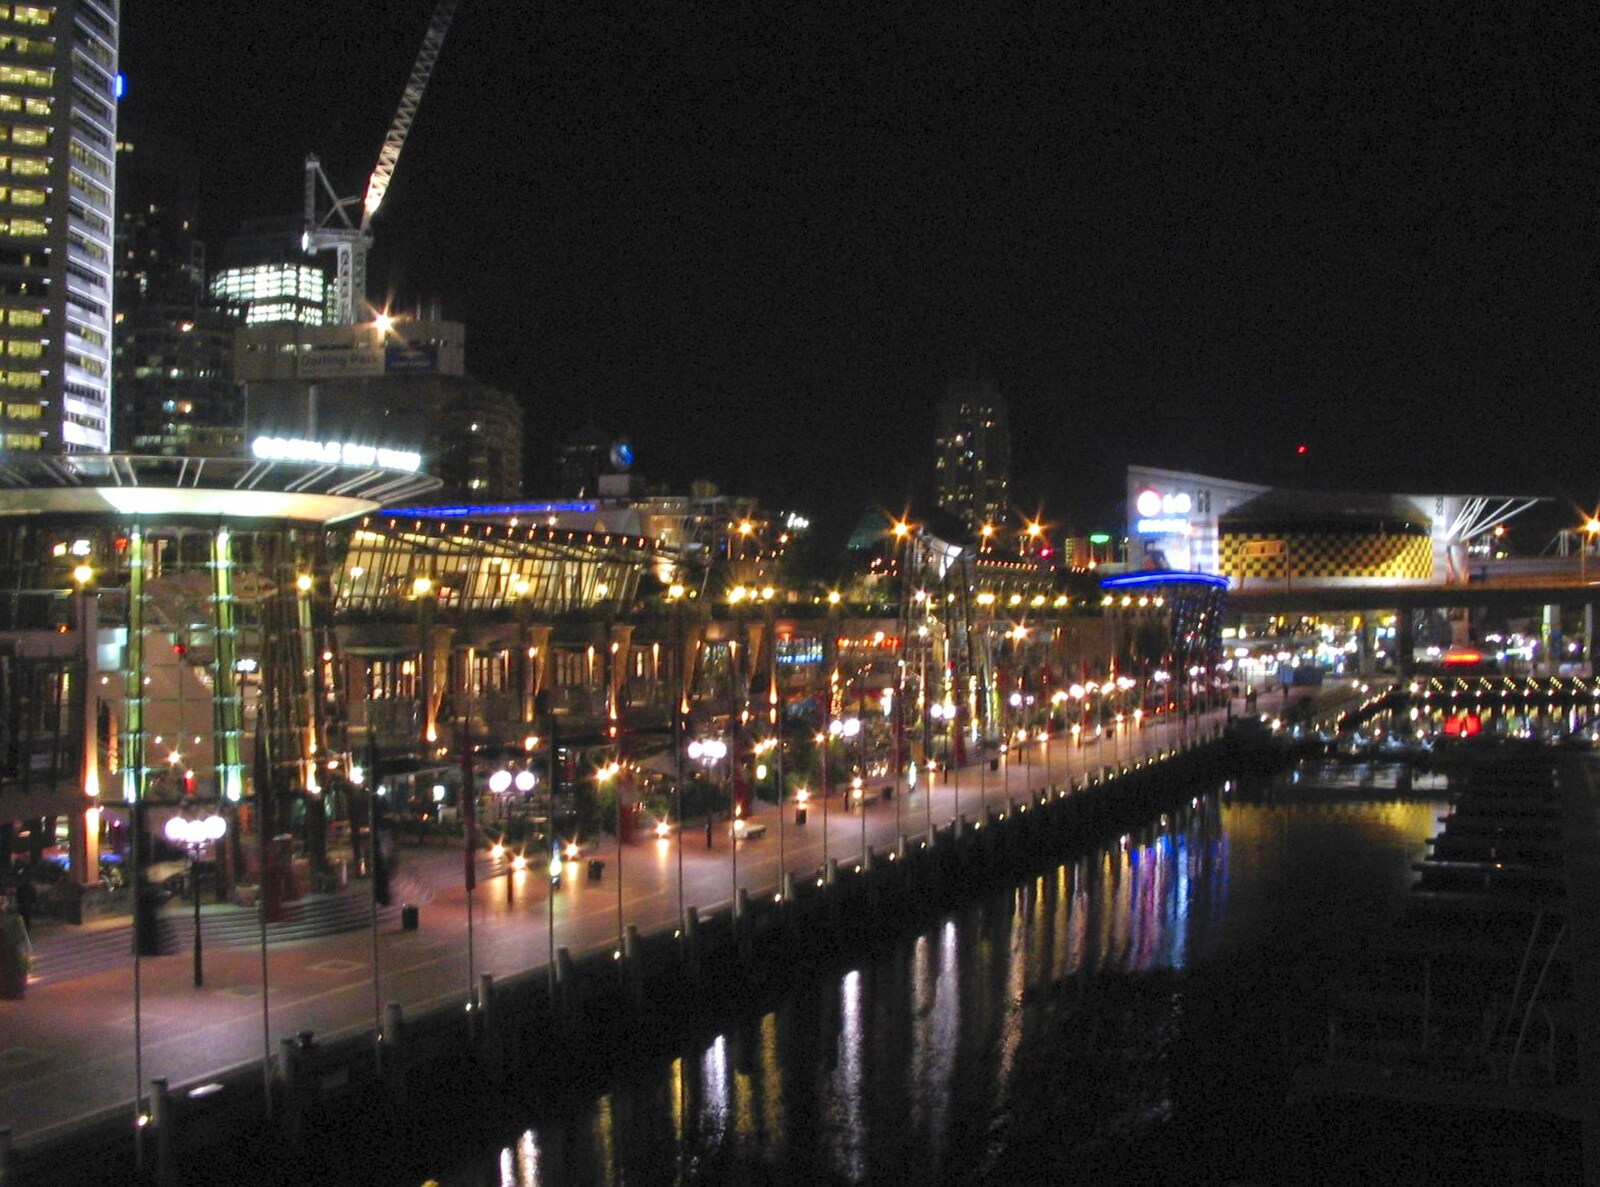 Somewhere near Darling Harbour from Sydney, New South Wales, Australia - 10th October 2004